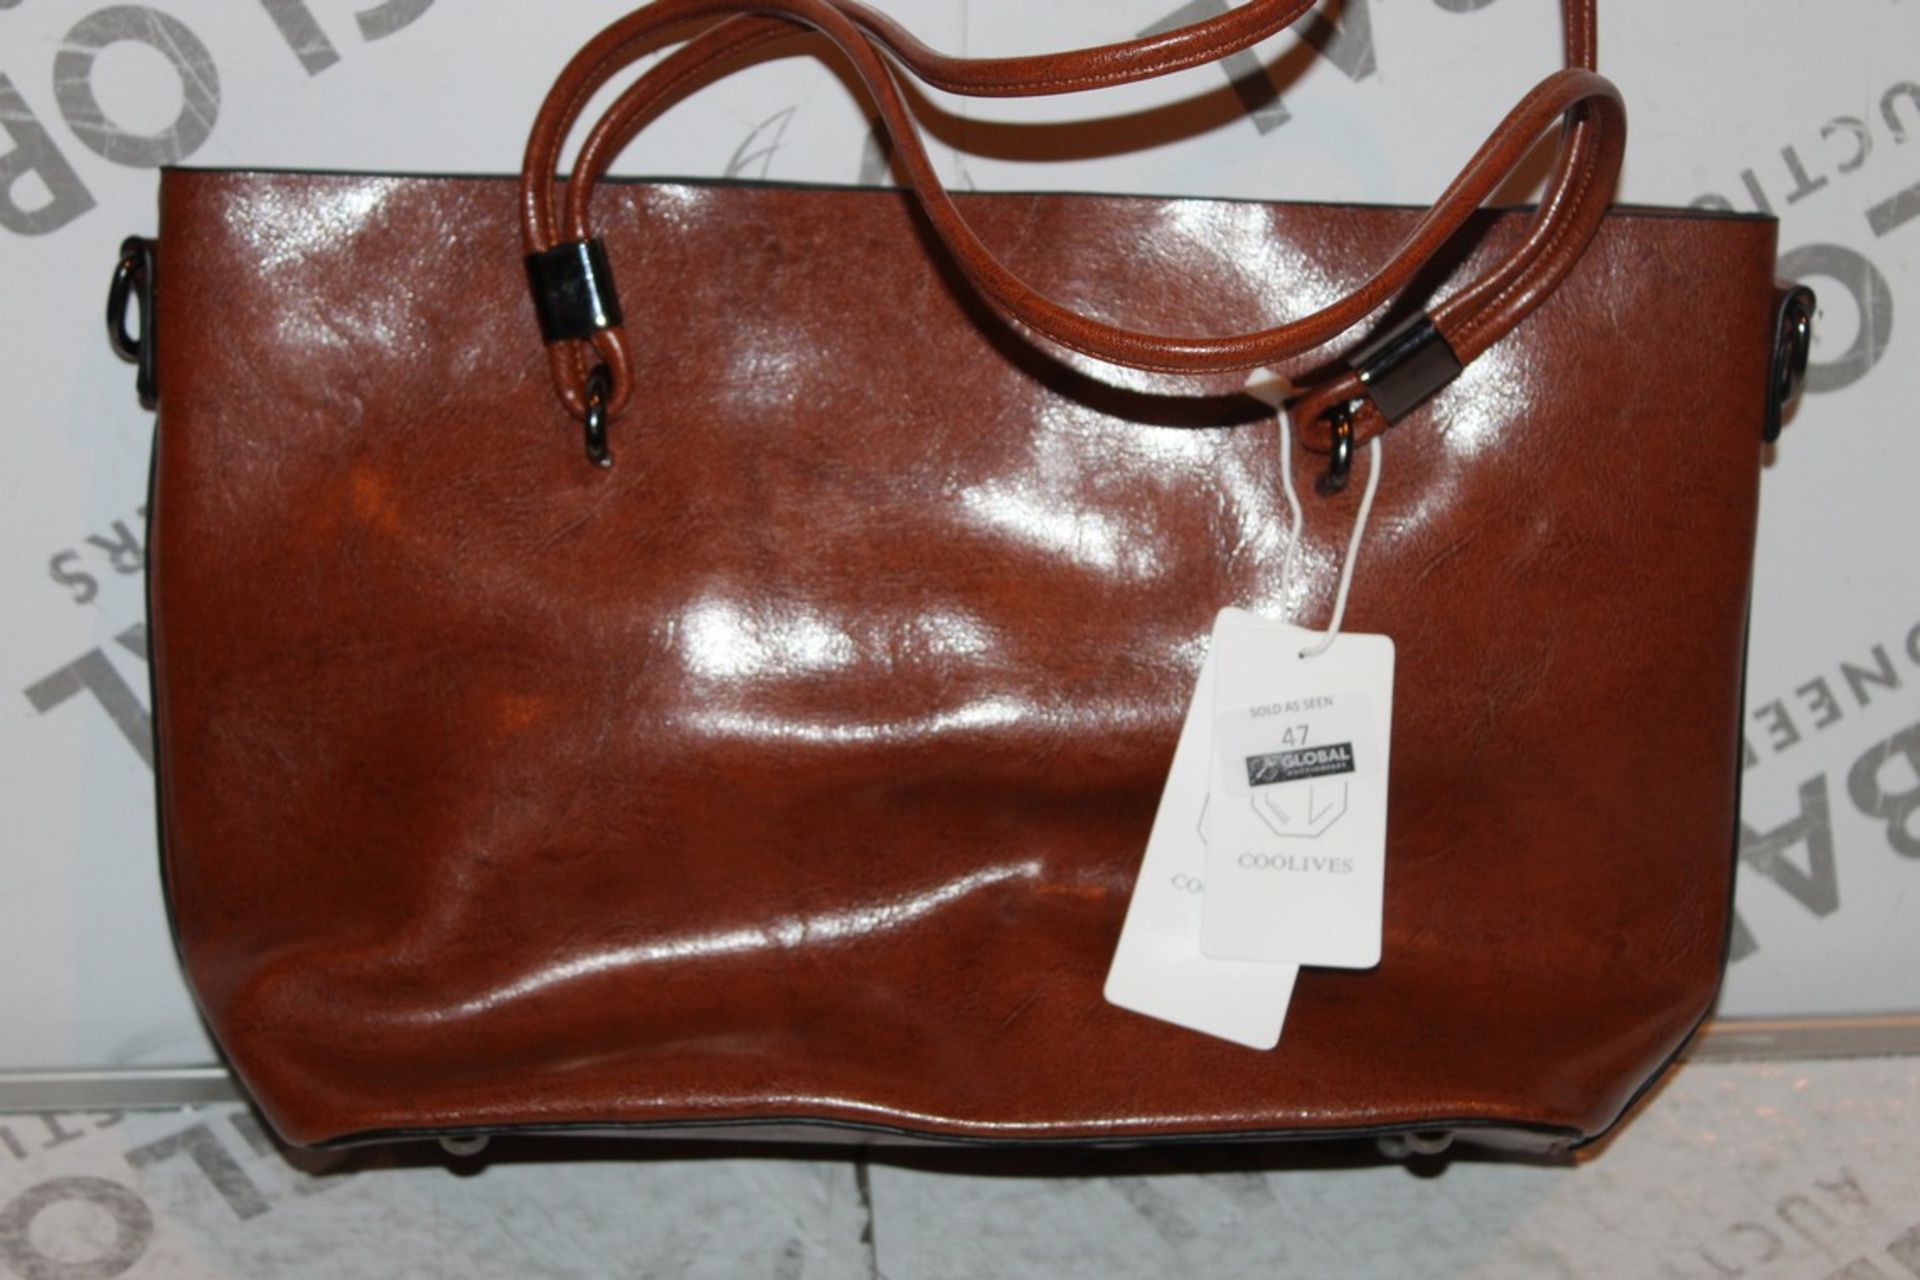 Brand New Womens, Coolives, Tan Leather, Tote HandBag, RRP £45.00